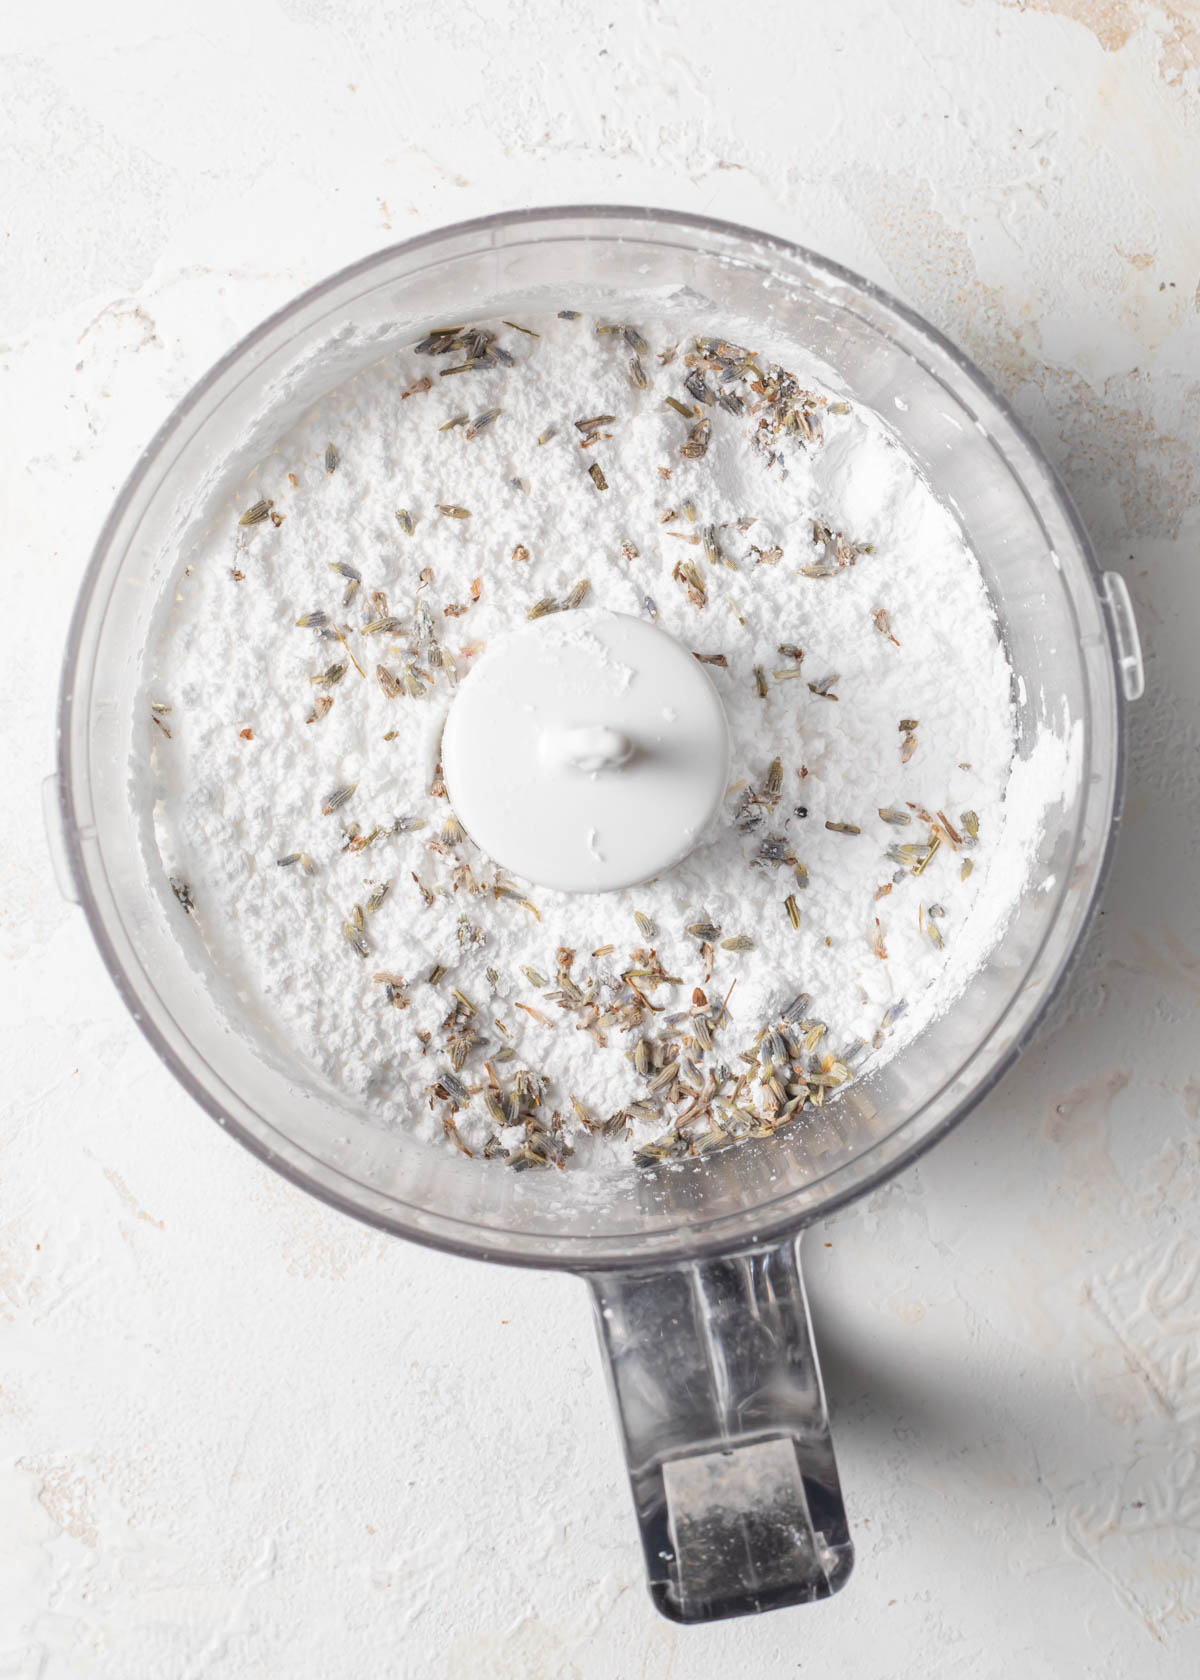 powdered sugar and dried lavender buds in a food processor